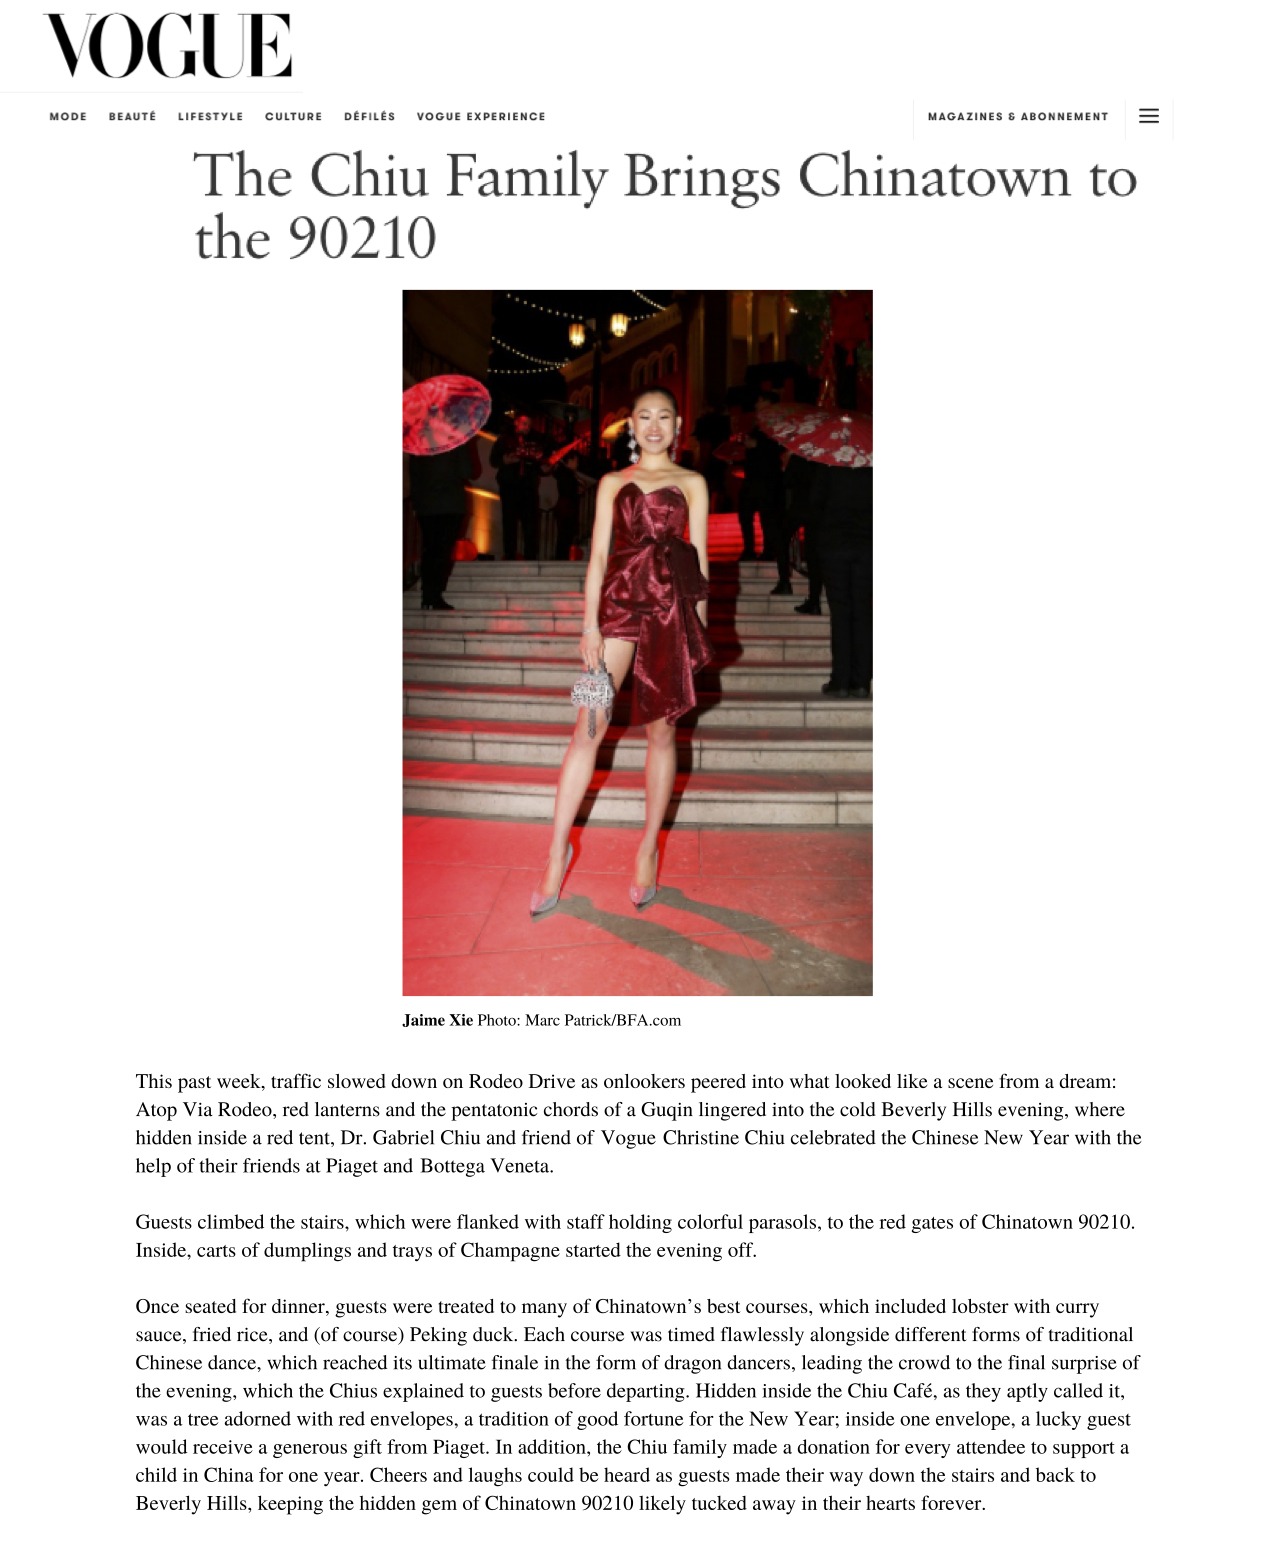 Vogue: The Chiu Family Brings Chinatown to the 90210